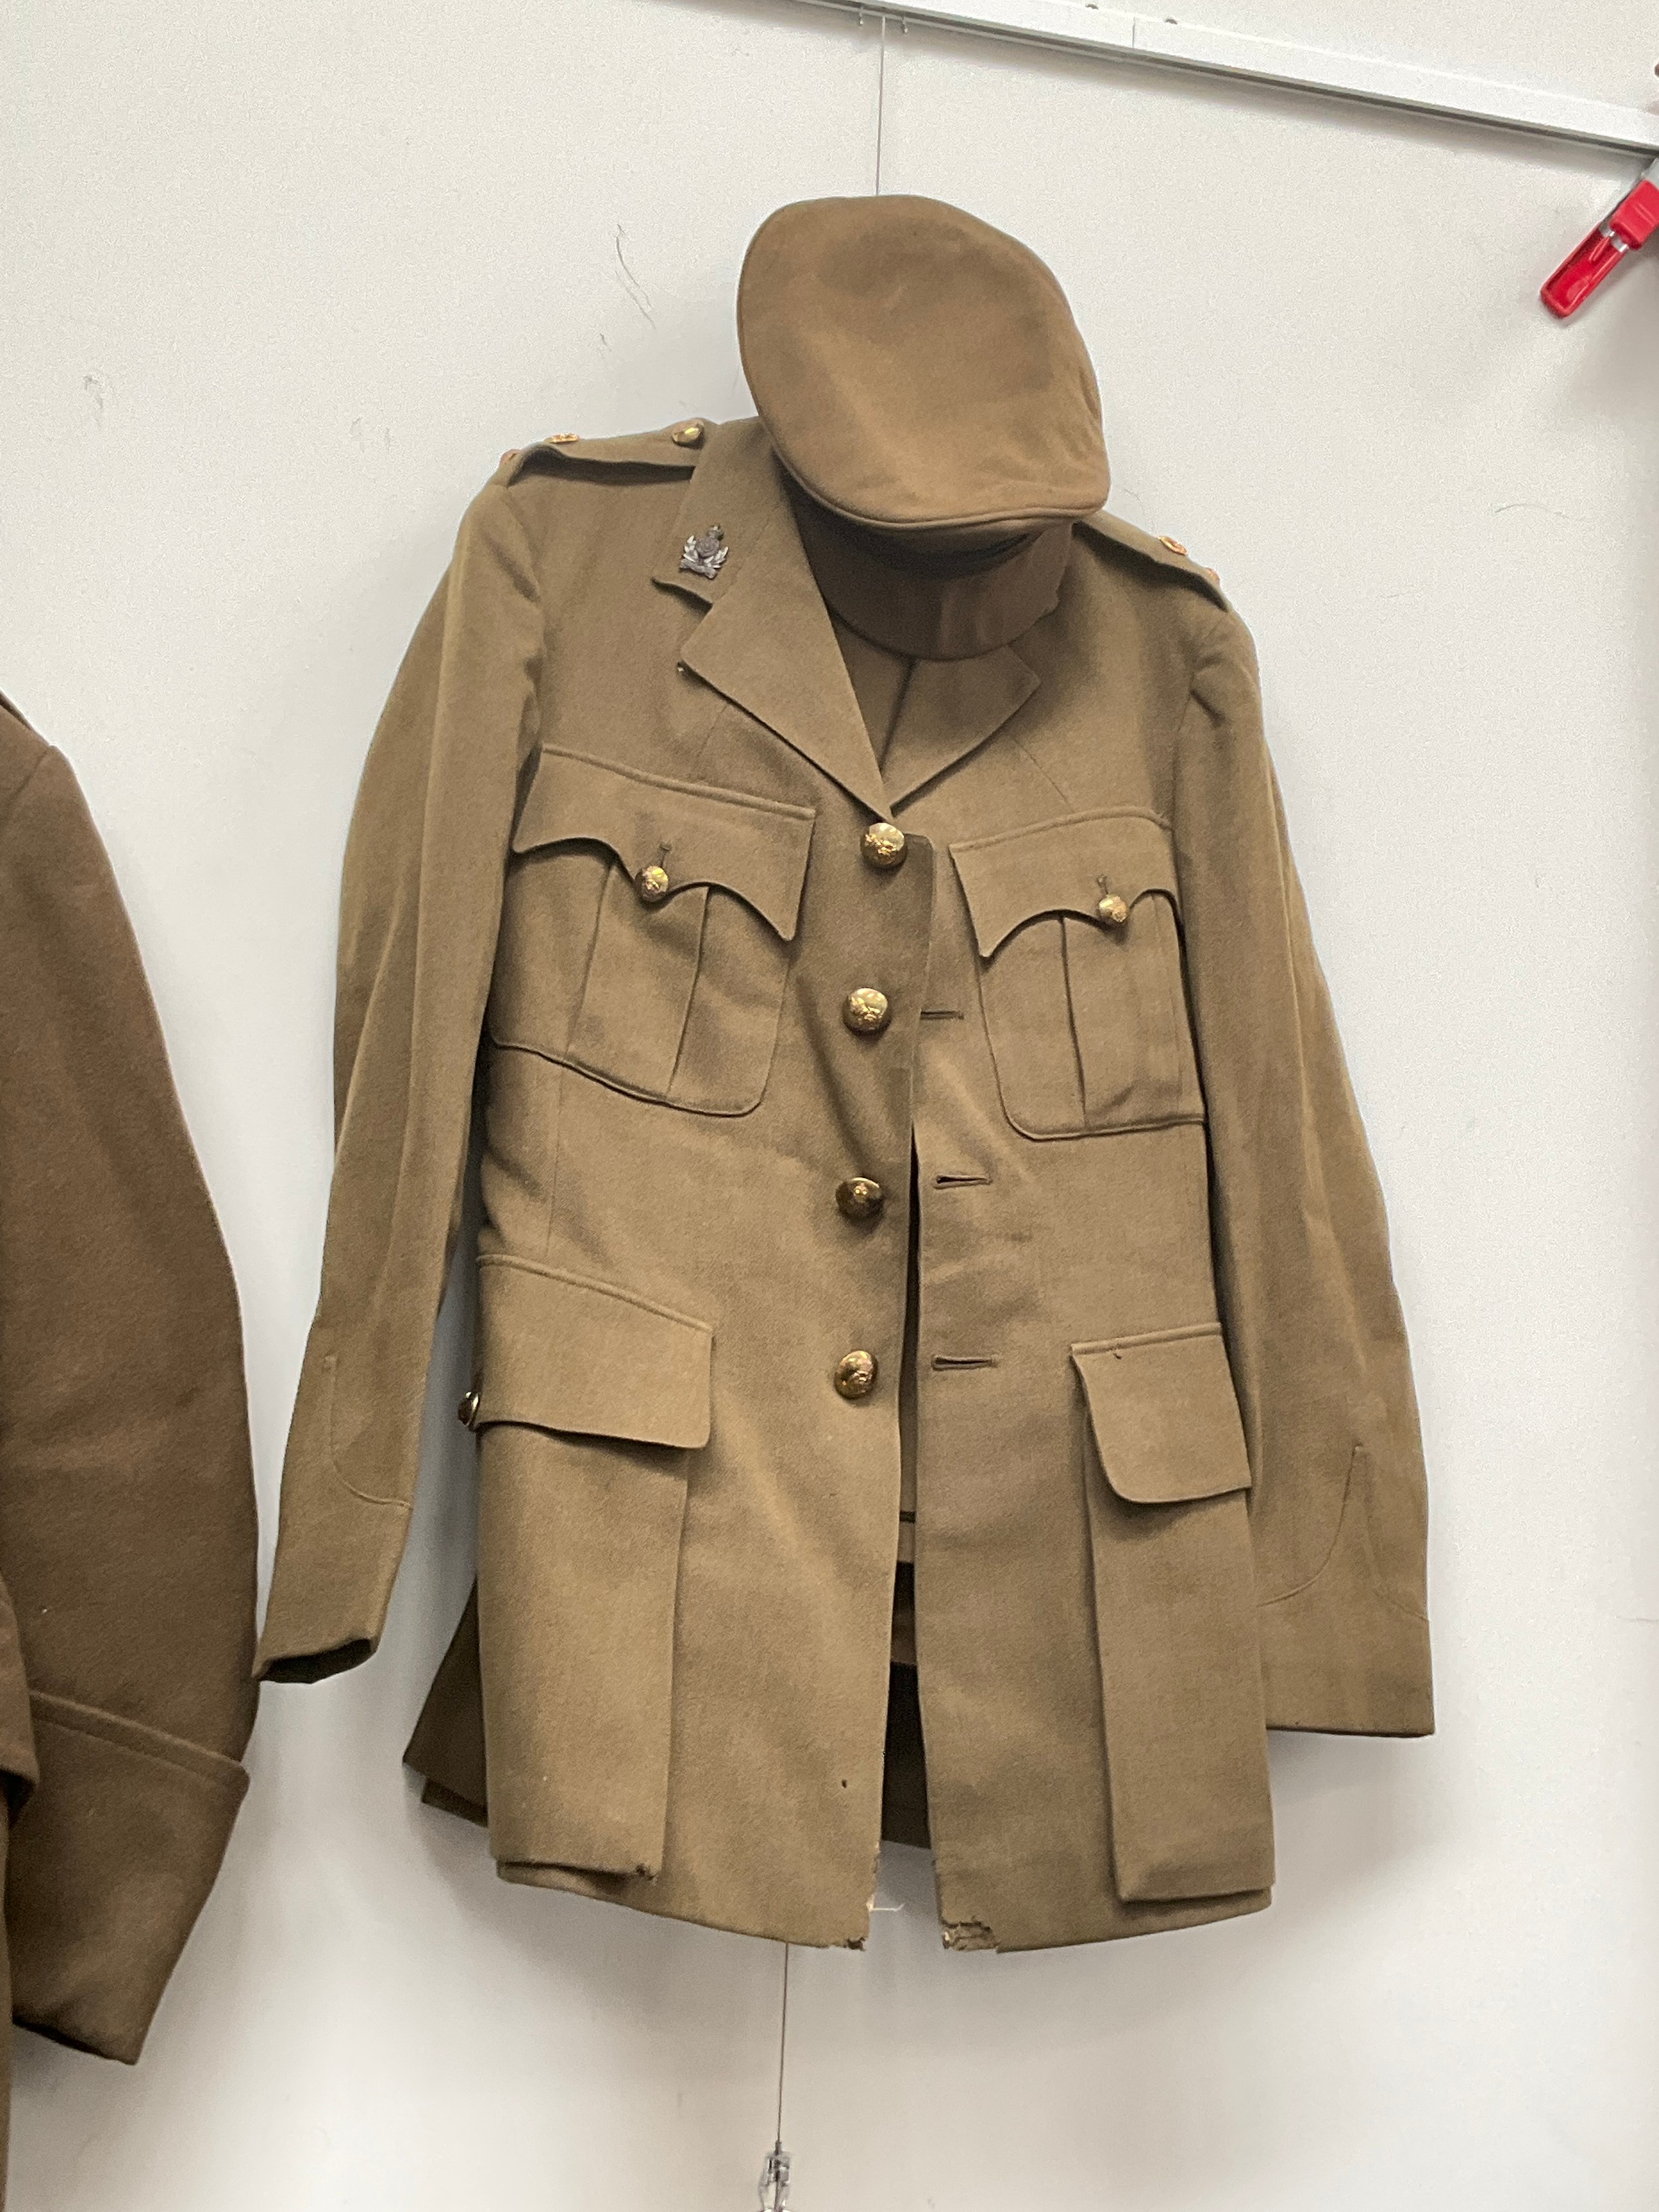 A WWII officer's uniform to an Lieutenant Colonel in the Intelligence Corps, with jacket, - Image 2 of 2